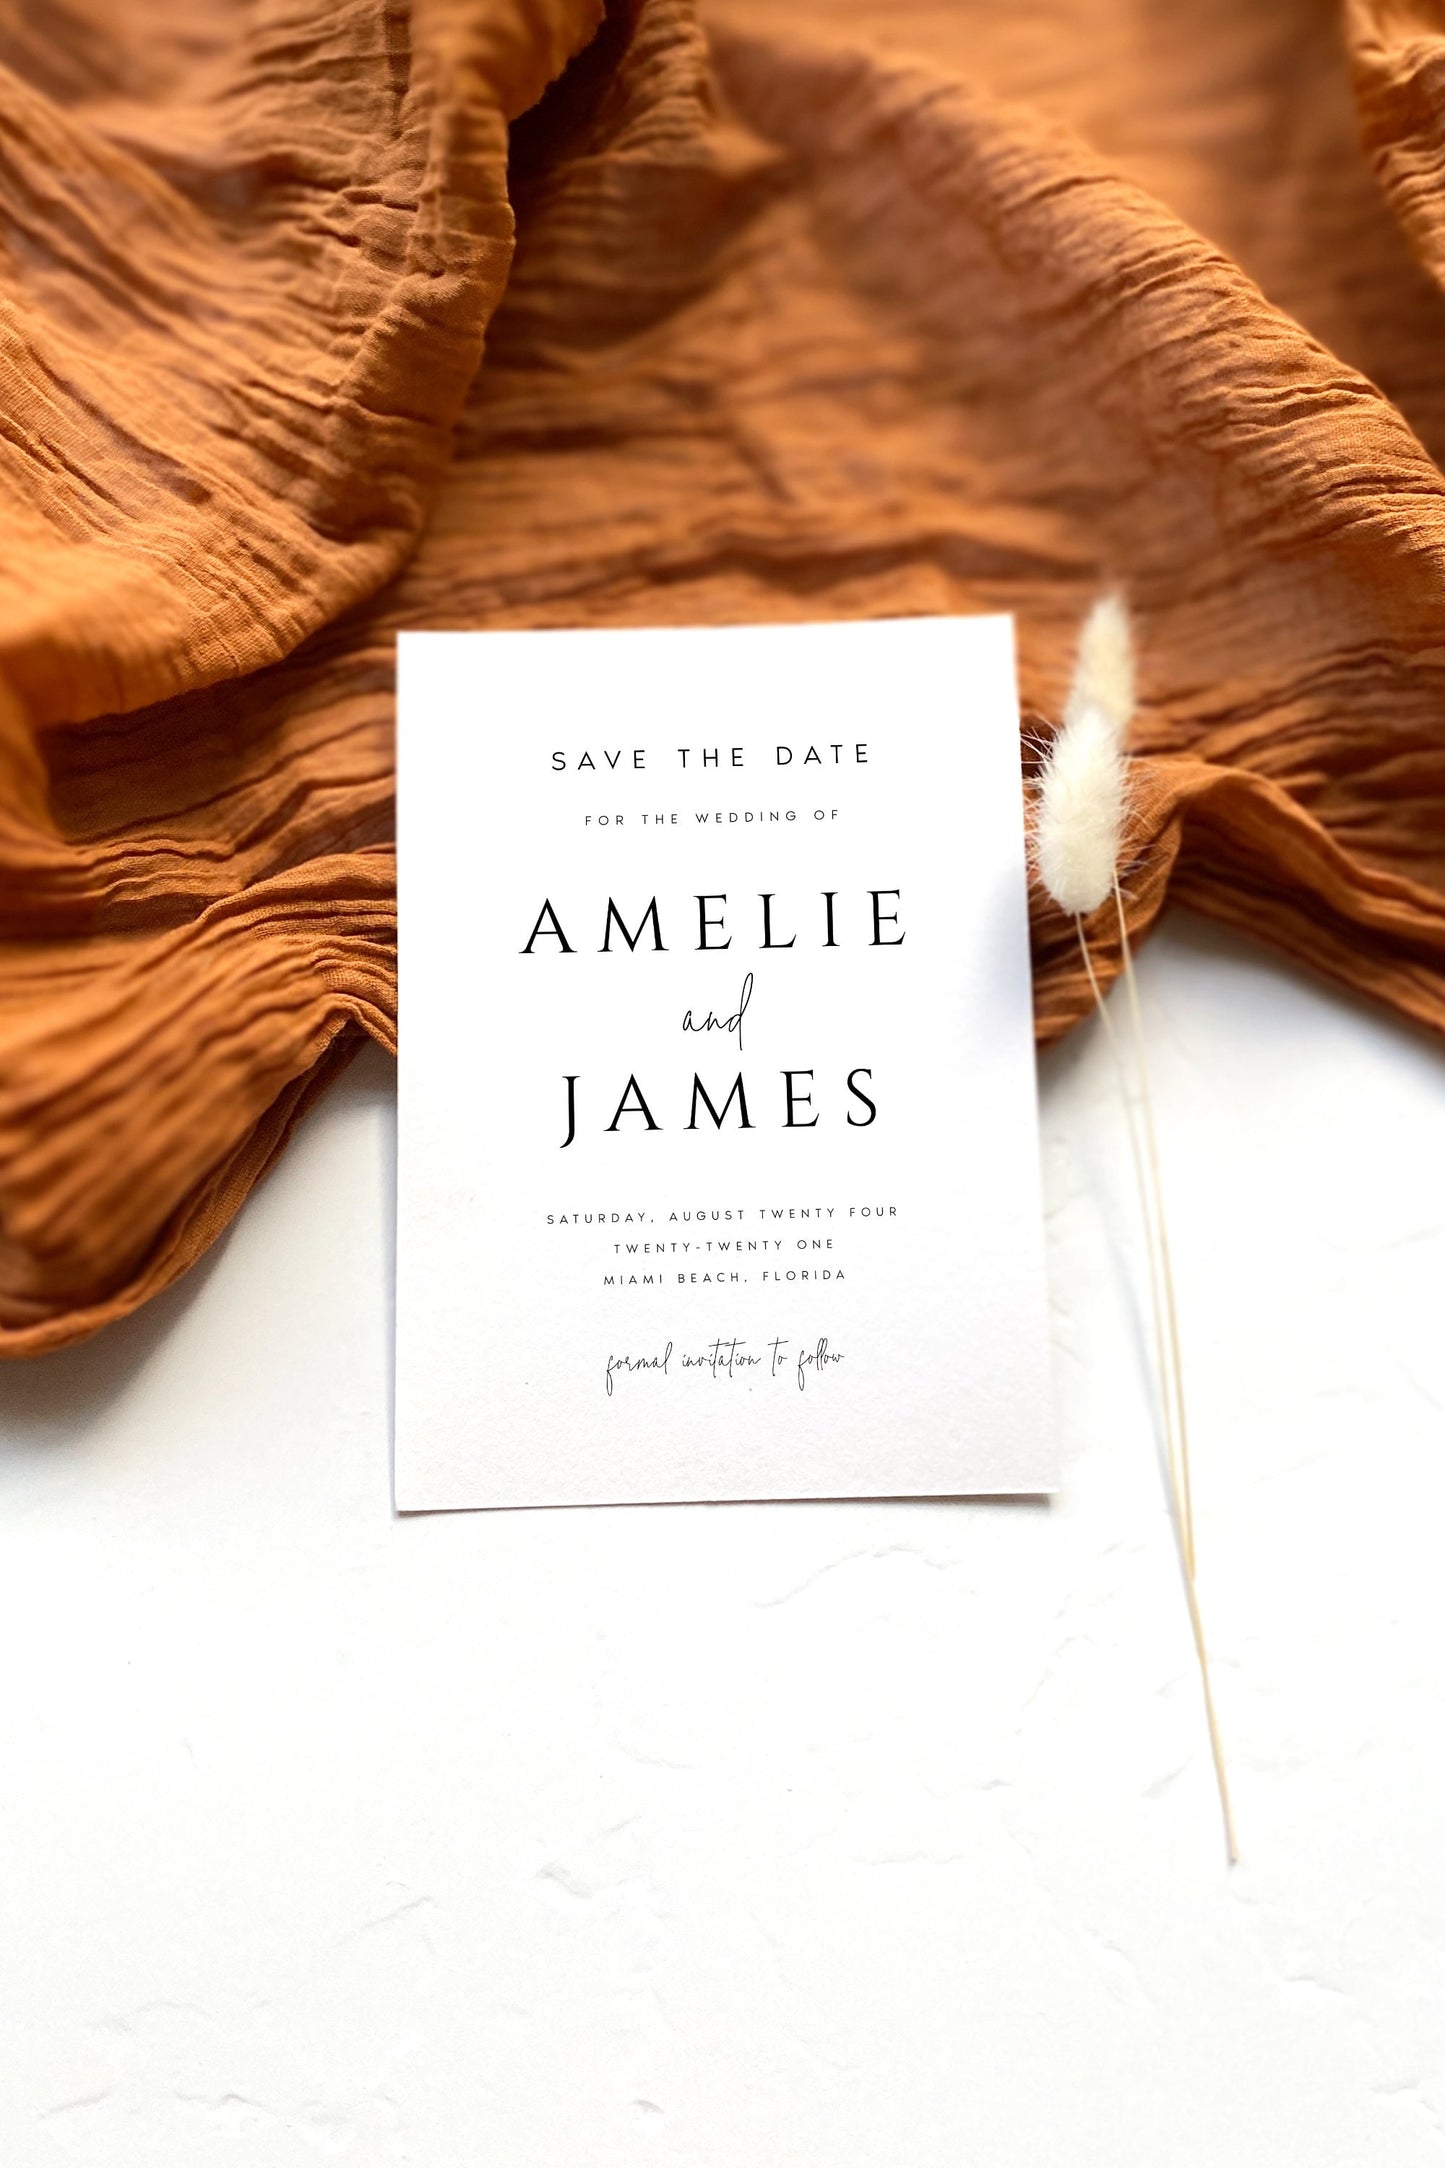 Amelie Save the Date Editable Template